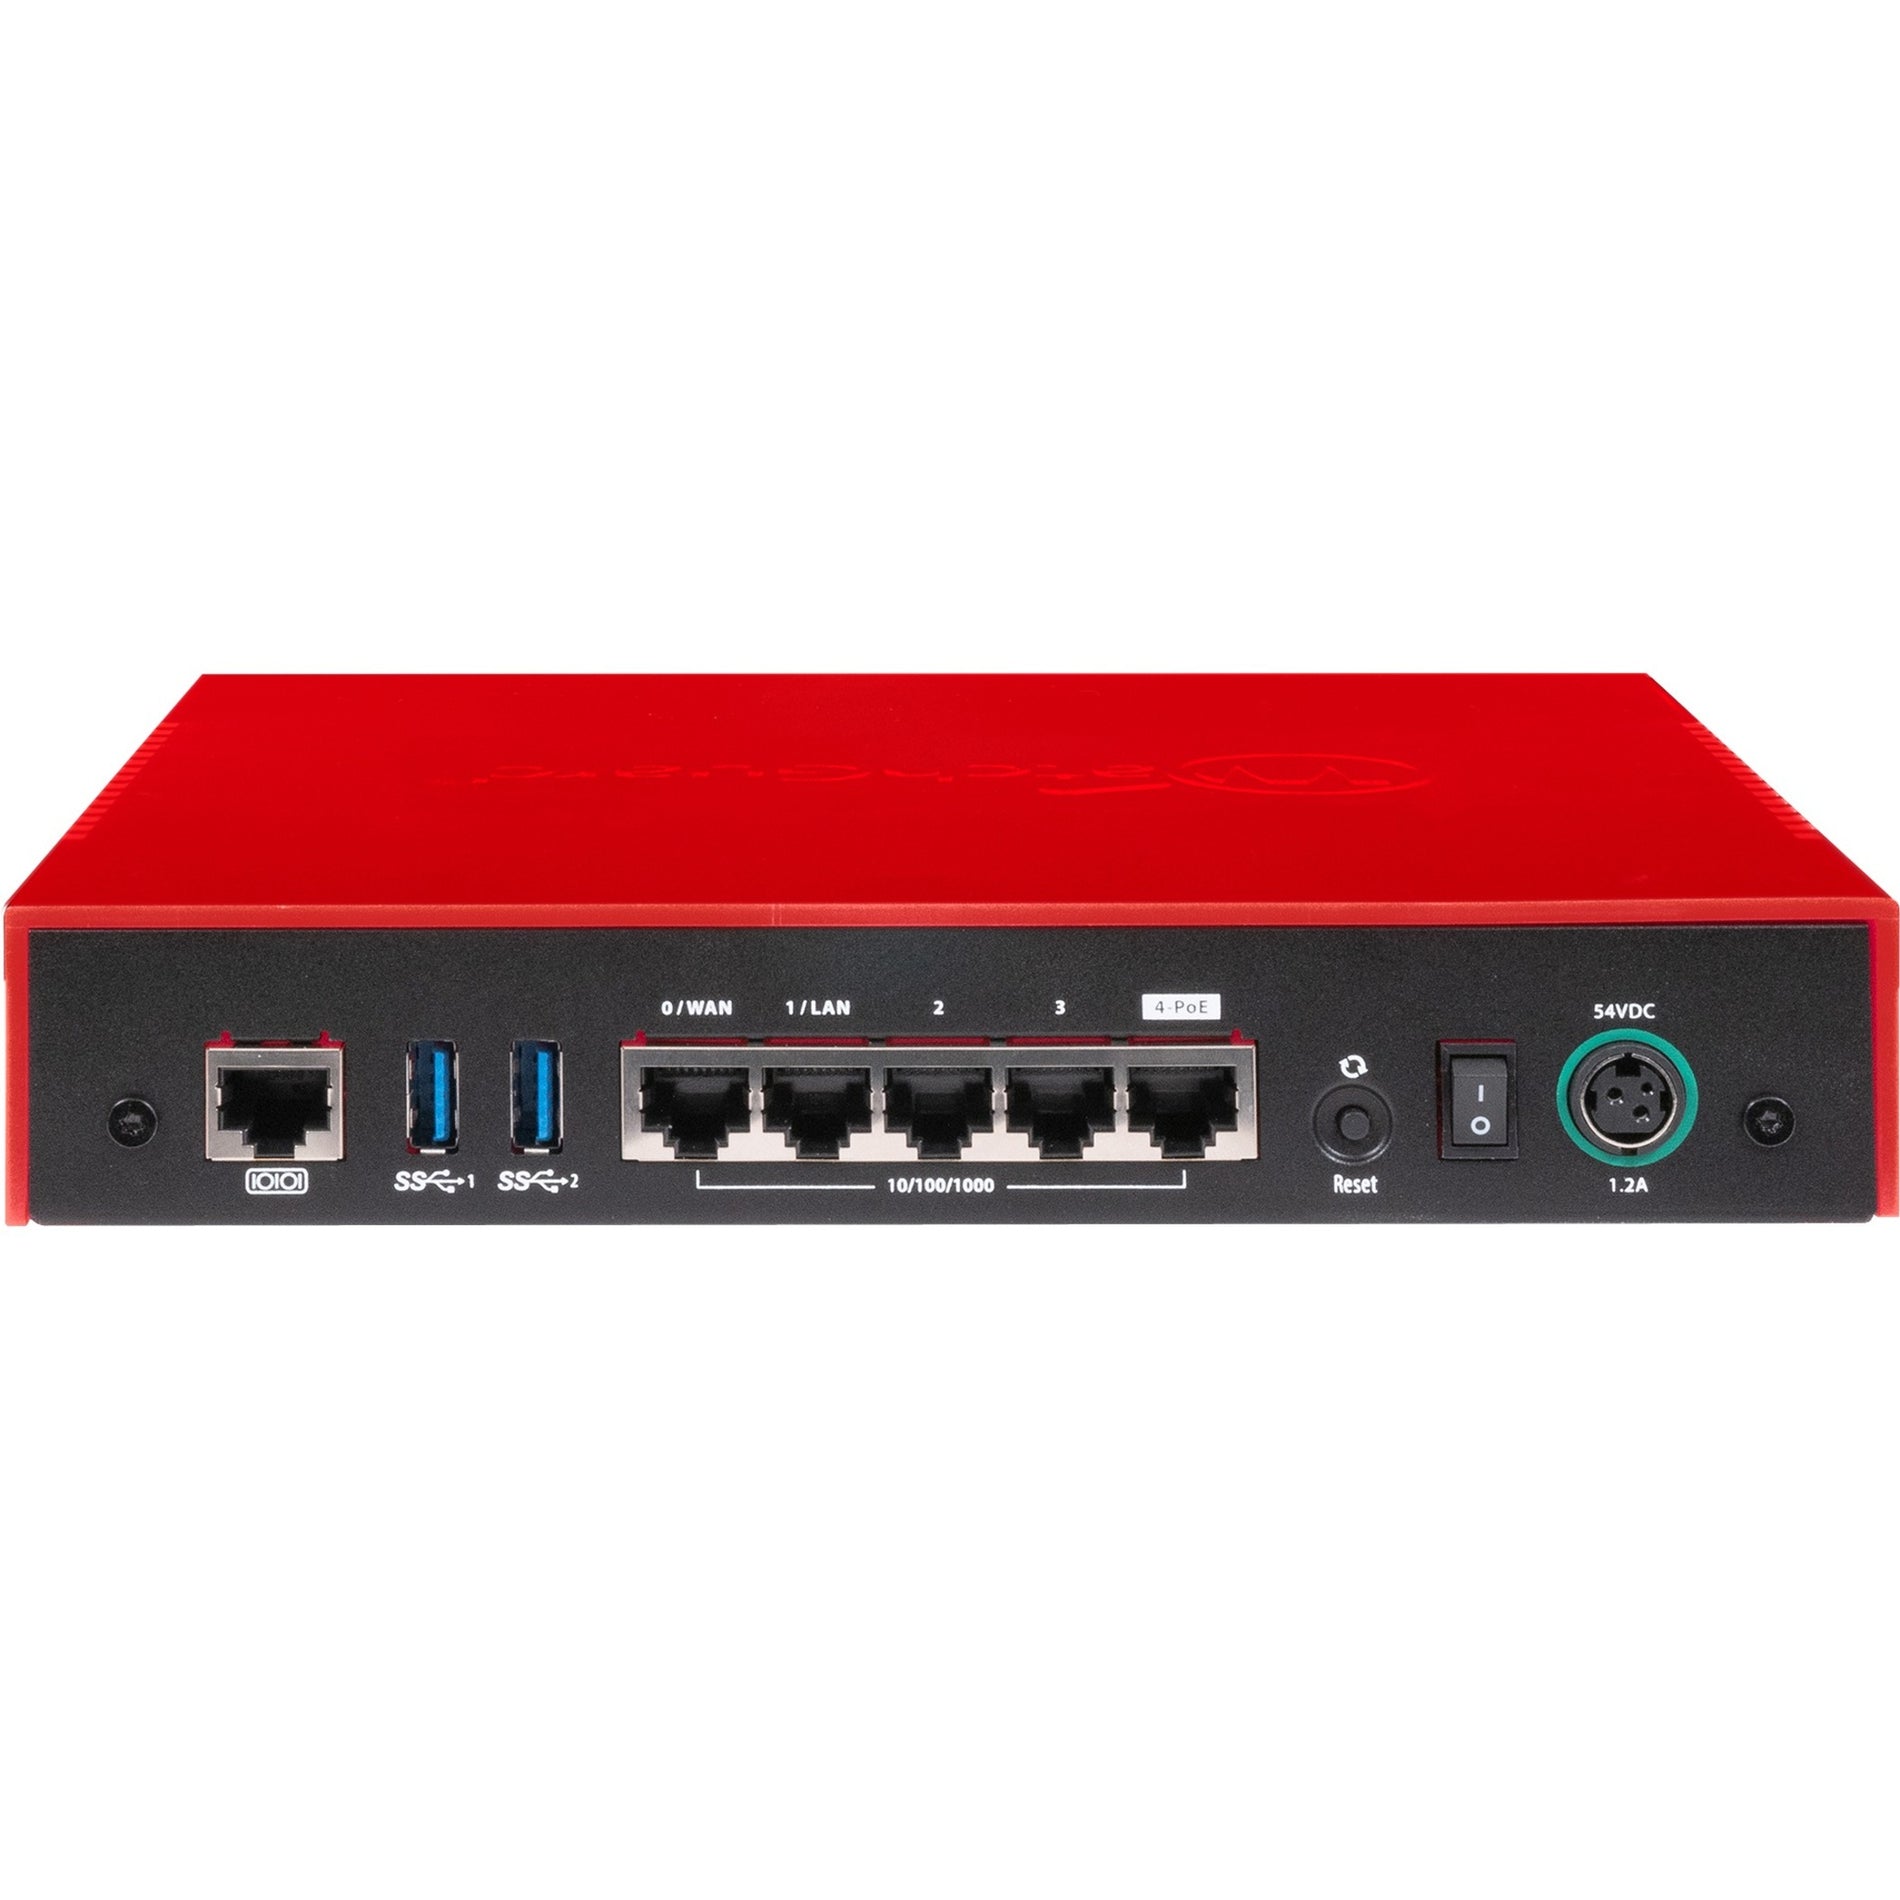 Trade Up to WatchGuard Firebox T40 with 3-yr Basic Security Suite (US) [Discontinued]